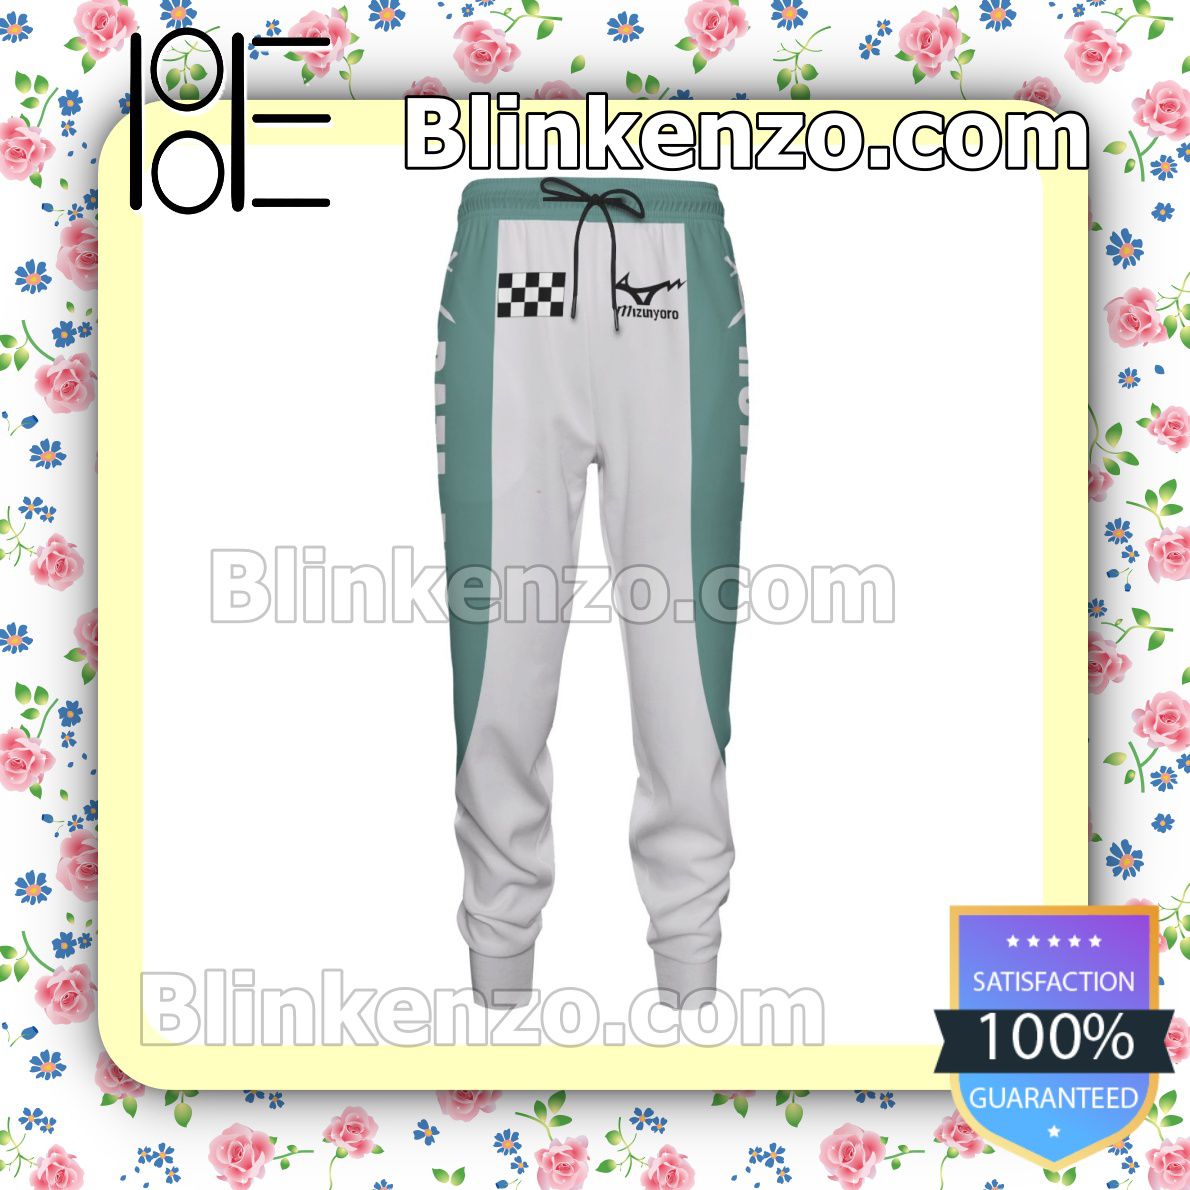 The cheapest F1 Datekou Unisex Gift For Family Joggers